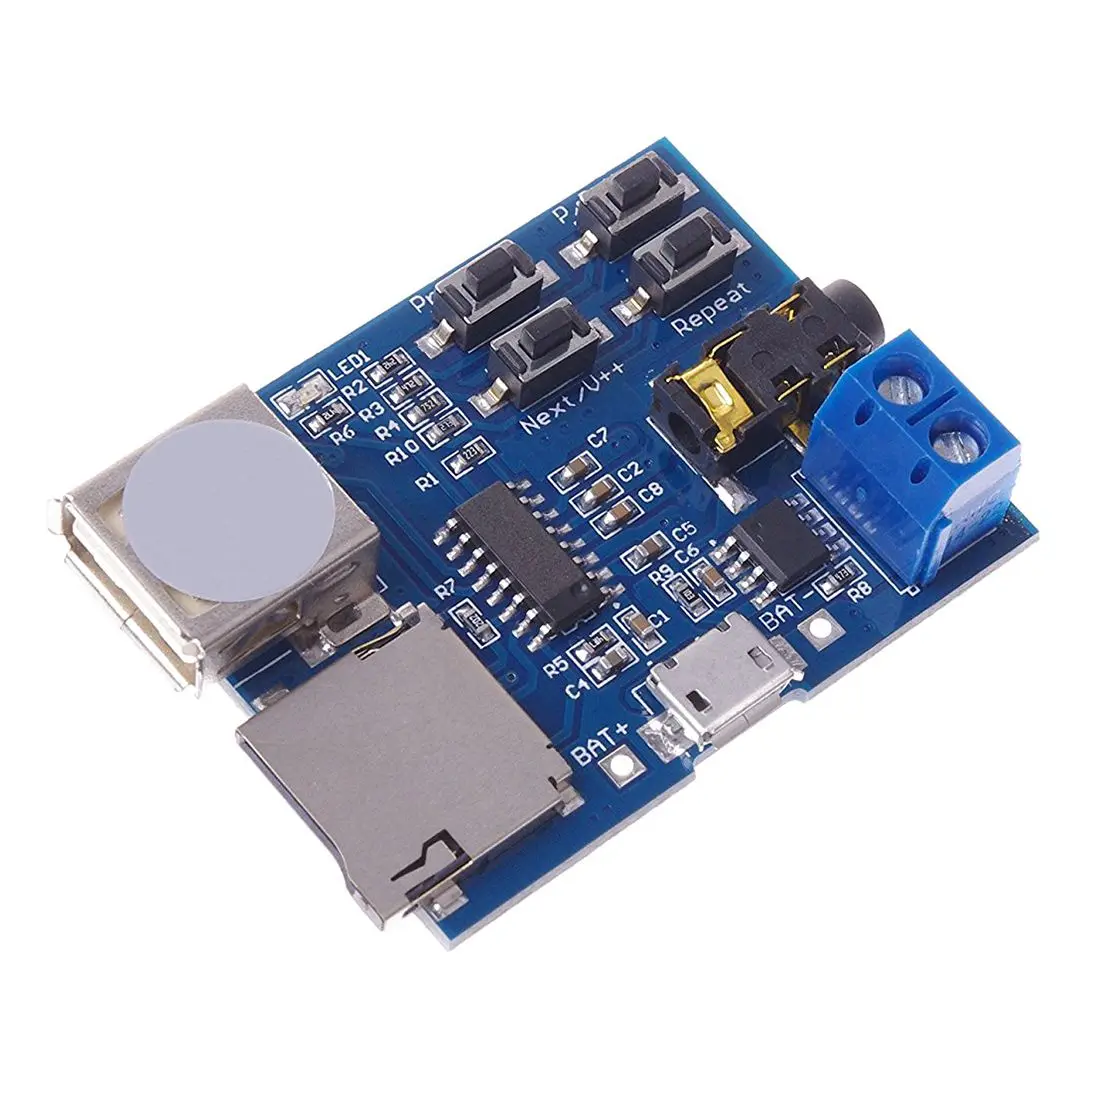 

Mp3 Lossless Decoders Decoding Power Amplifier Mp3 Player Audio Module Mp3 Decoder Board support TF Card USB